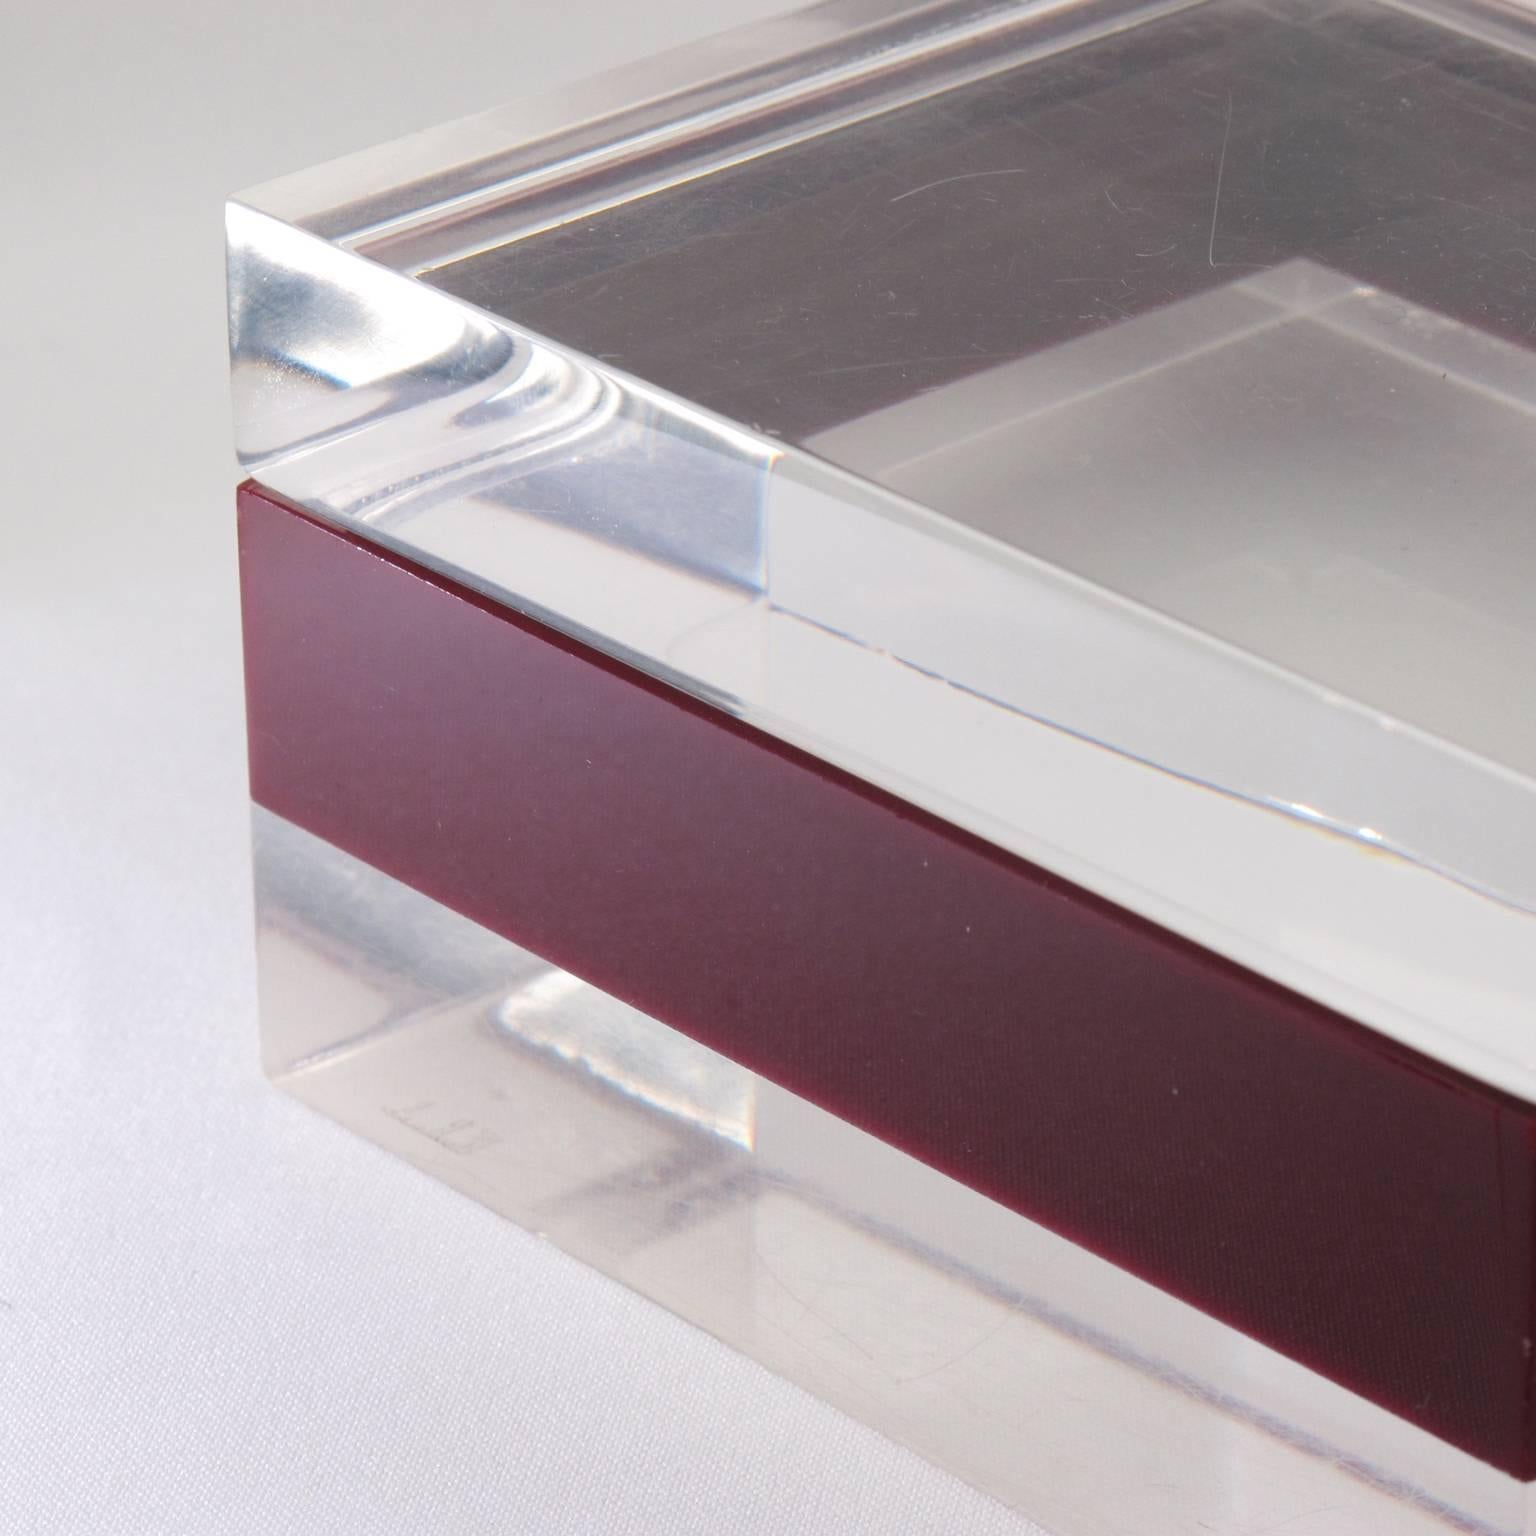 Plexiglass Mid-Century Modern Clear and Cranberry Lucite Lidded Box by Dunhill, circa 1970s